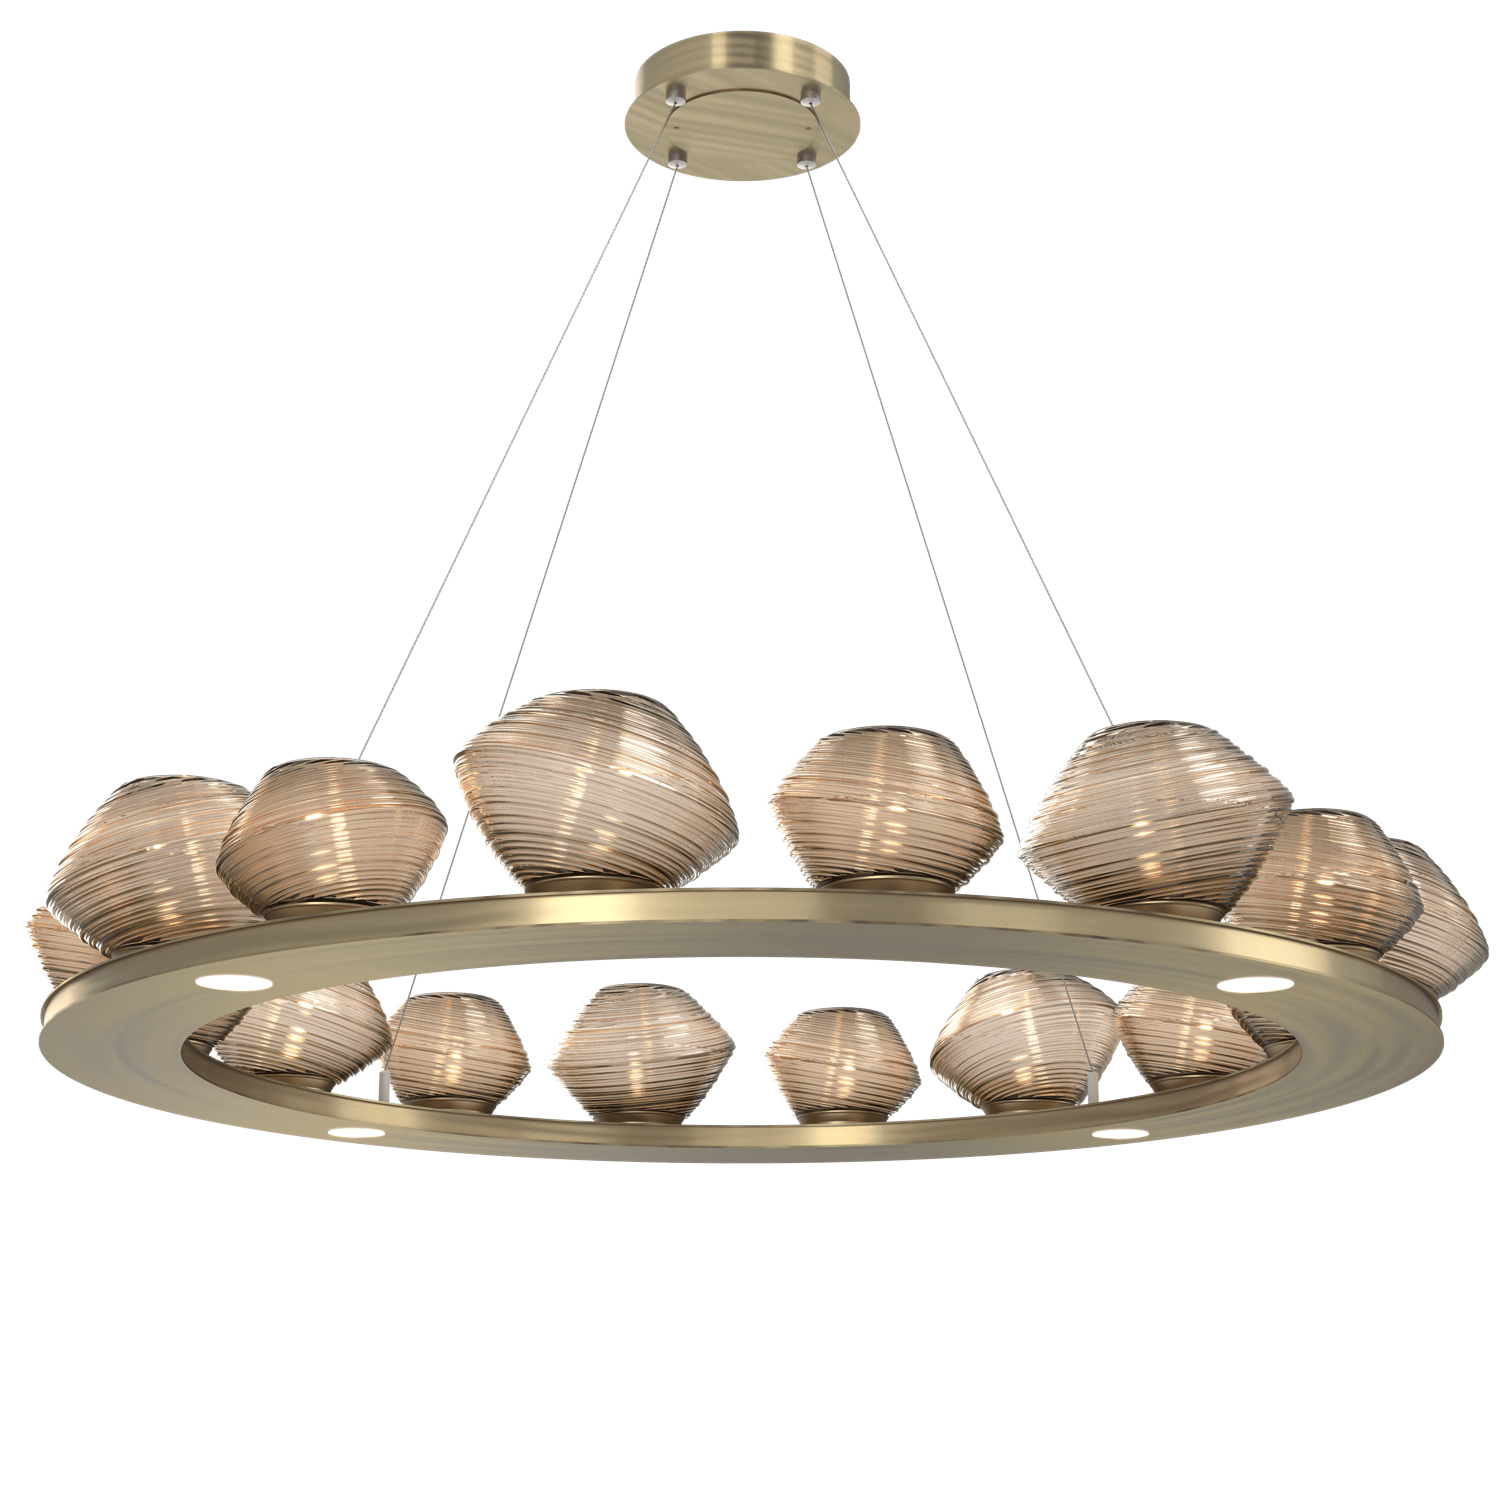 CHB0089-0D-HB-B-Hammerton-Studio-Mesa-48-inch-ring-chandelier-with-heritage-brass-finish-and-bronze-blown-glass-shades-and-LED-lamping